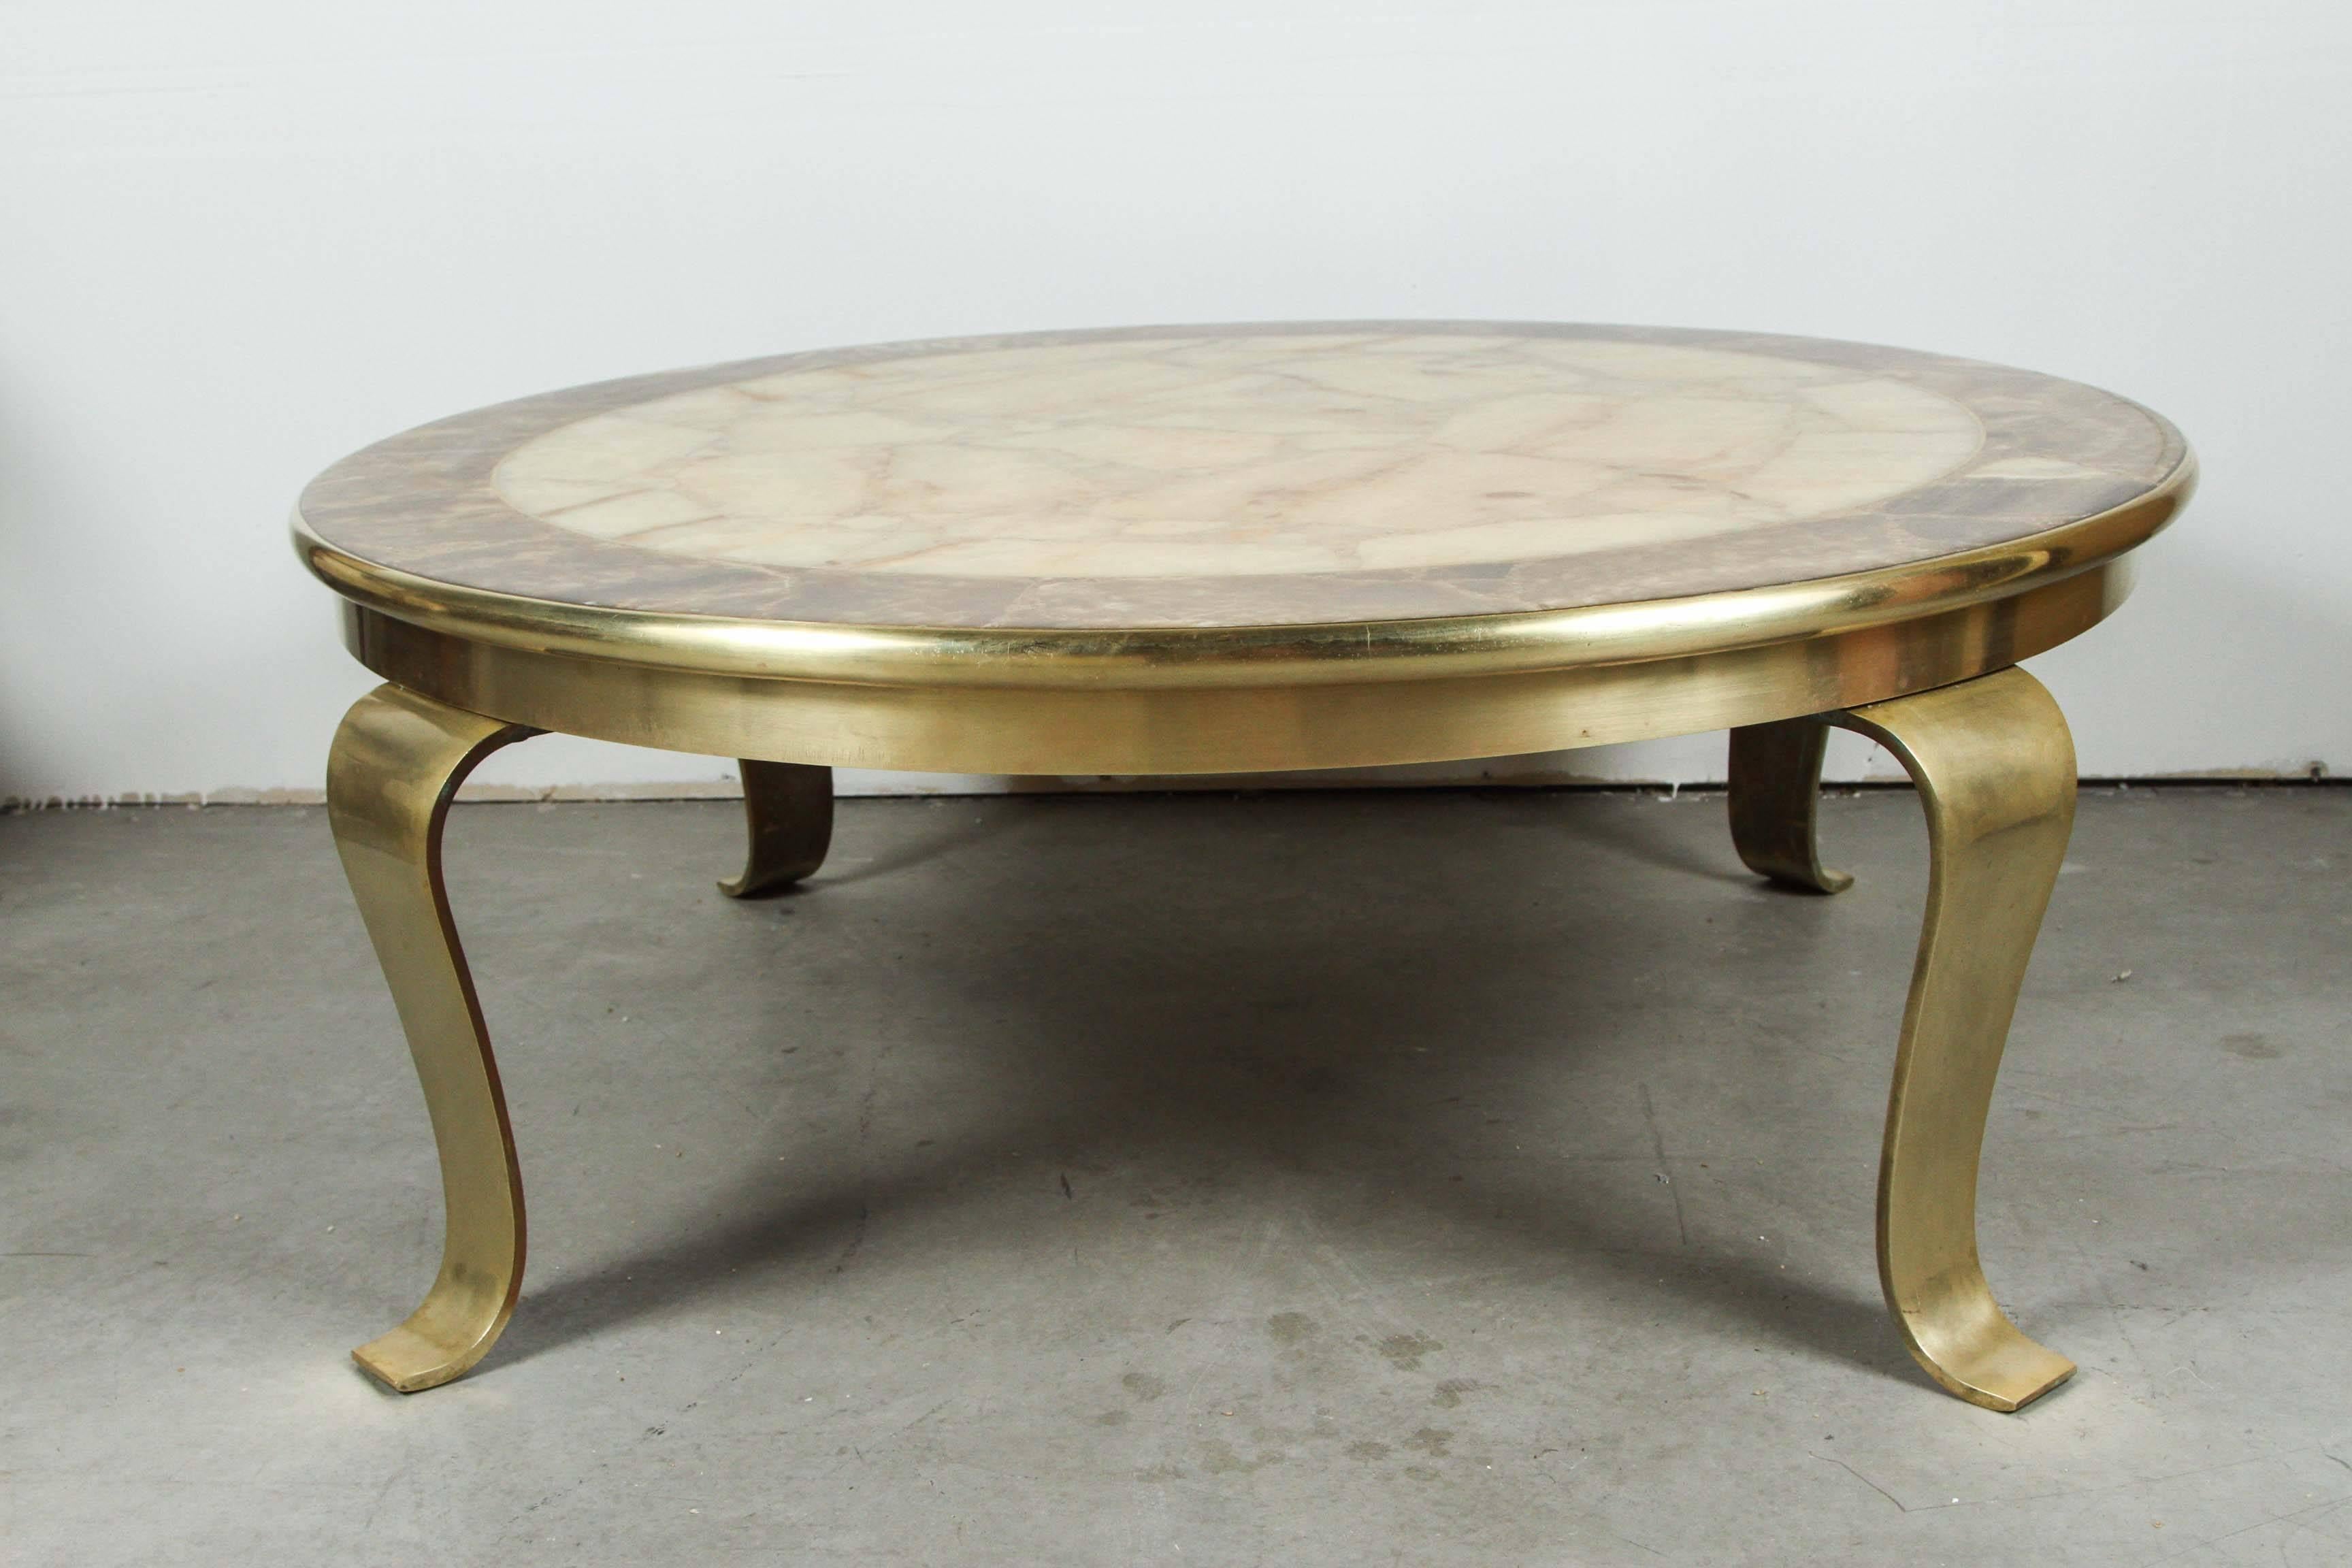 Beautiful brass and onyx table by Robert & Mito Block.
The stunning onyx top has a thick brass edge banding and is mounted on polished brass scrolling legs.